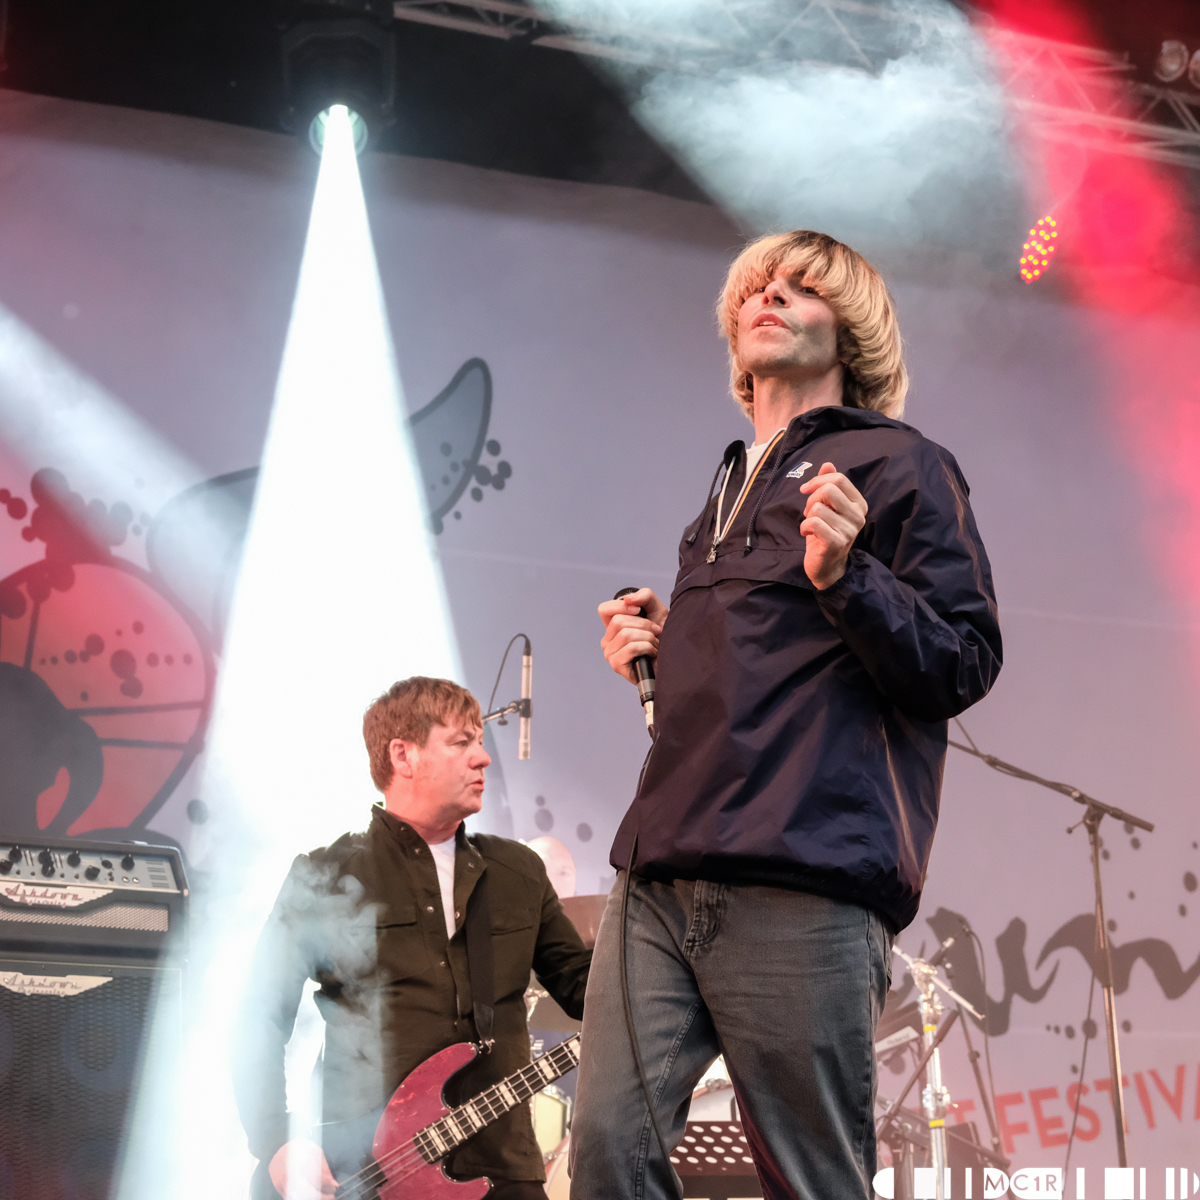 The Charlatans at Belladrum 2018 6 - The Charlatans, Friday Belladrum 2018 - IMAGES